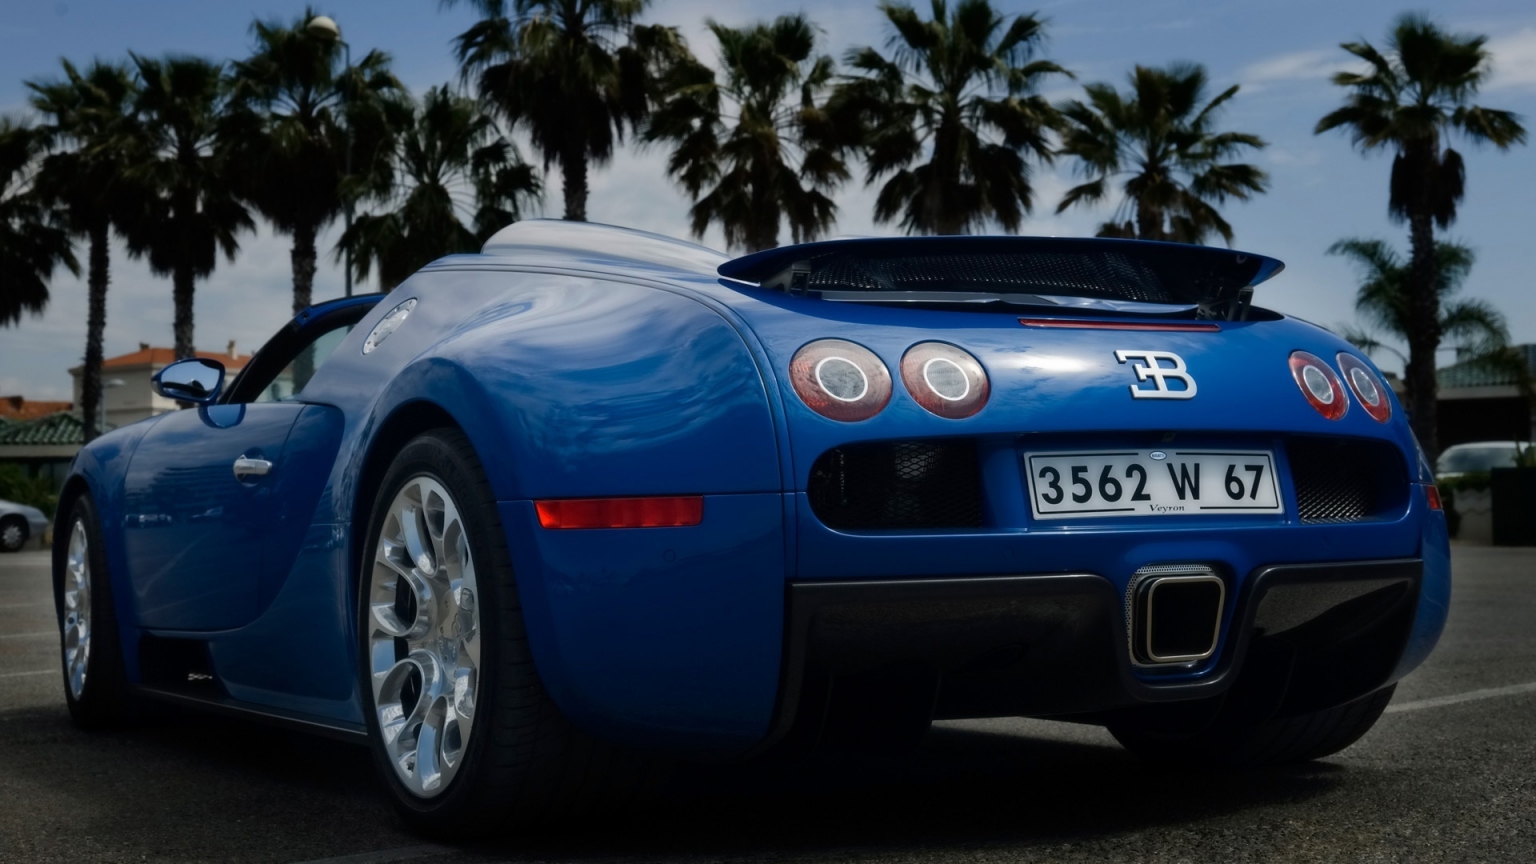 Bugatti Veyron 16.4 Grand Sport 2010 in Cannes - Rear Angle 2 for 1536 x 864 HDTV resolution